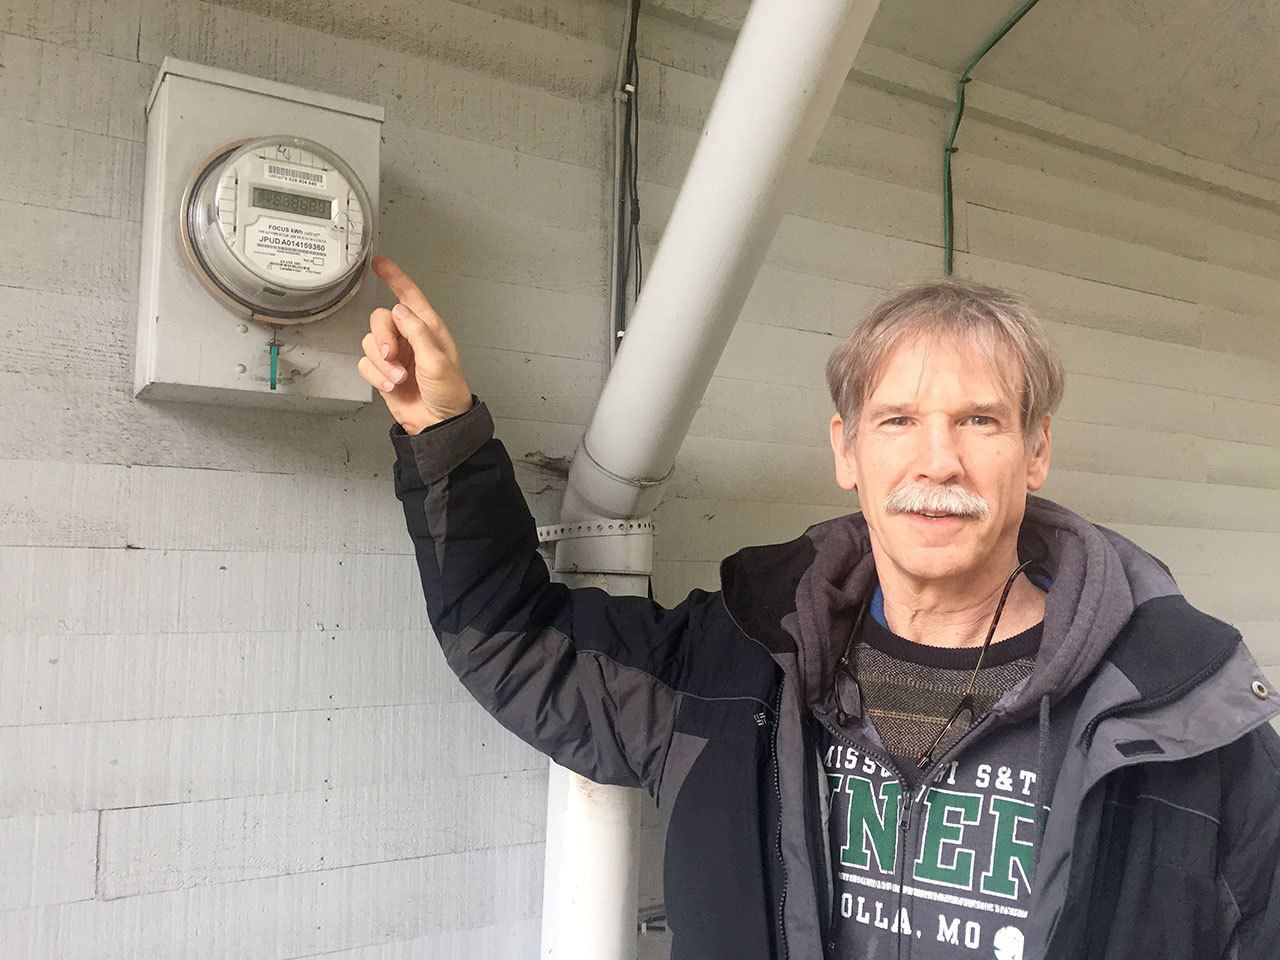 Jim Parker, general manager of the Jefferson County PUD, shows off the new digital meters that will replace the outdated mechanical models used by most PUD customers. (Cydney McFarland/Peninsula Daily News)